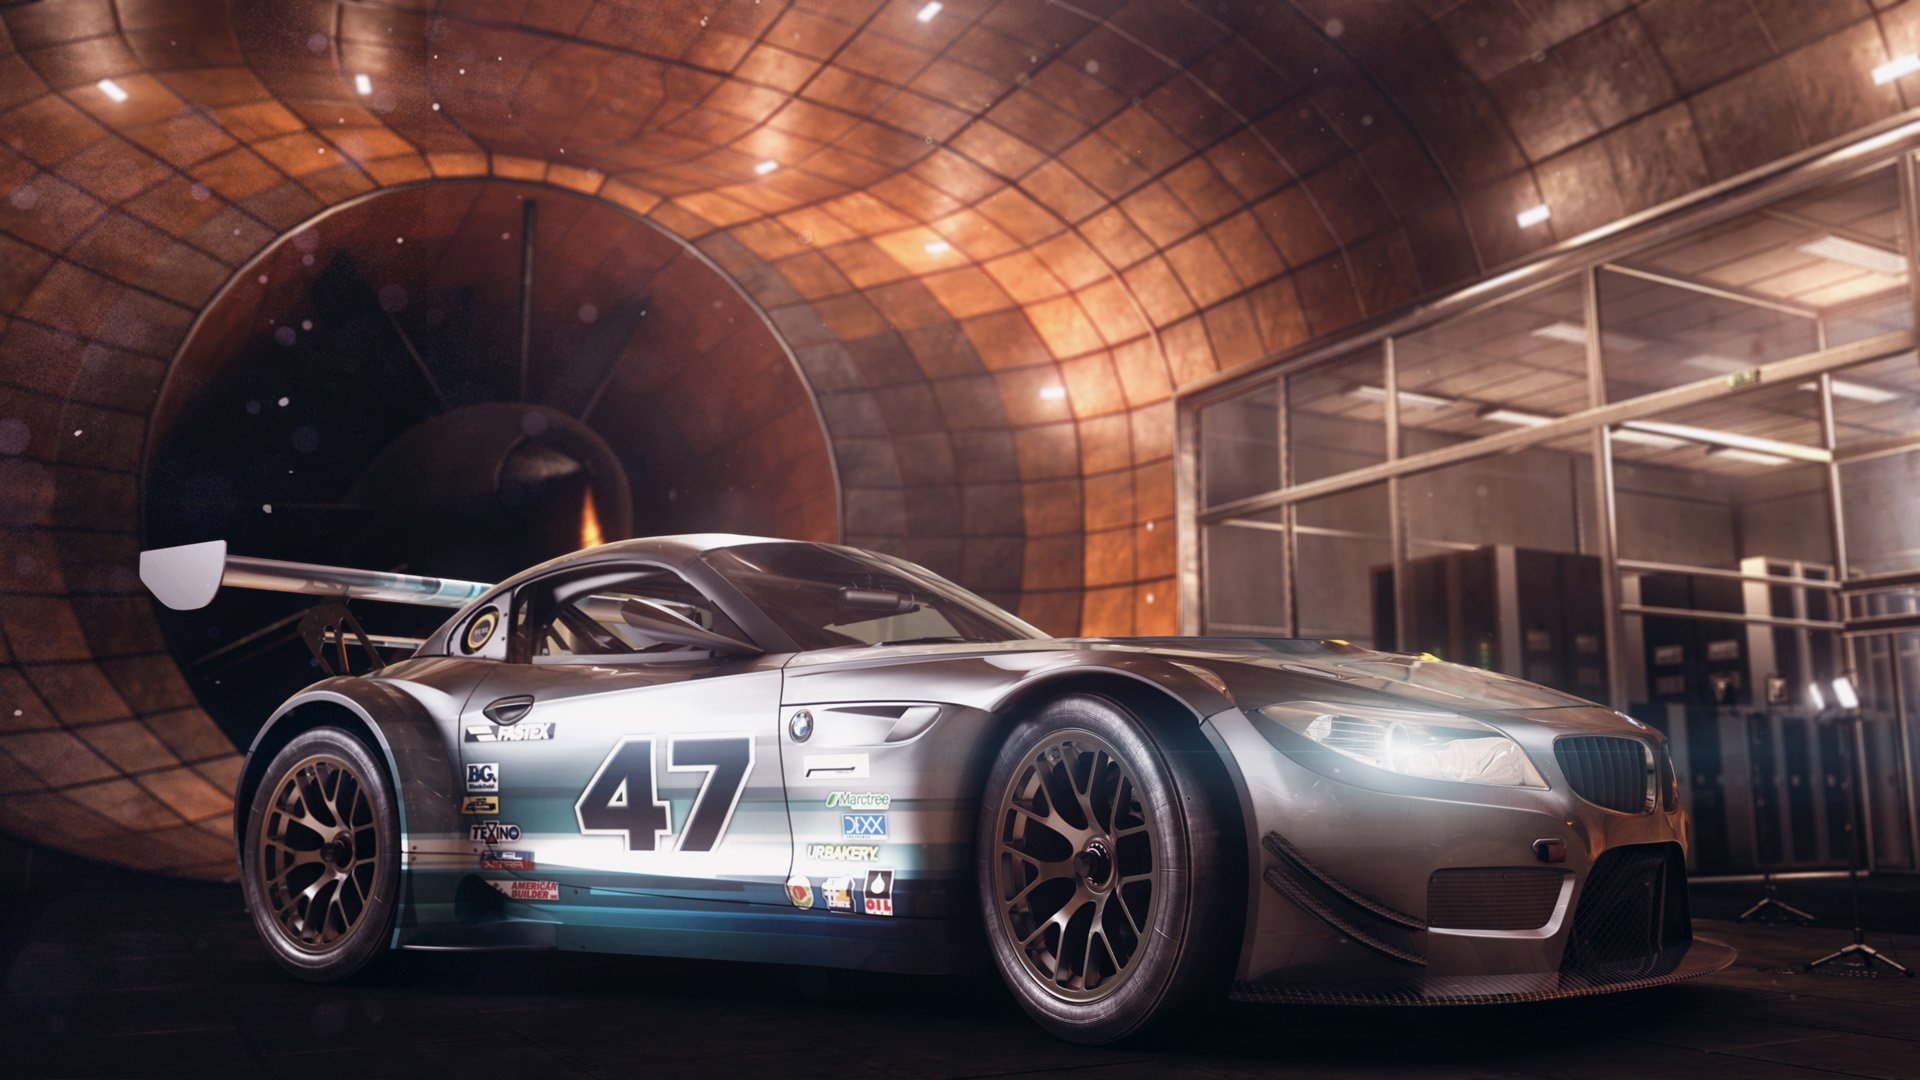 the crew, Racing, Race, Muscle, Tuning, Supercar, Crew, Rpg,  10 Wallpaper